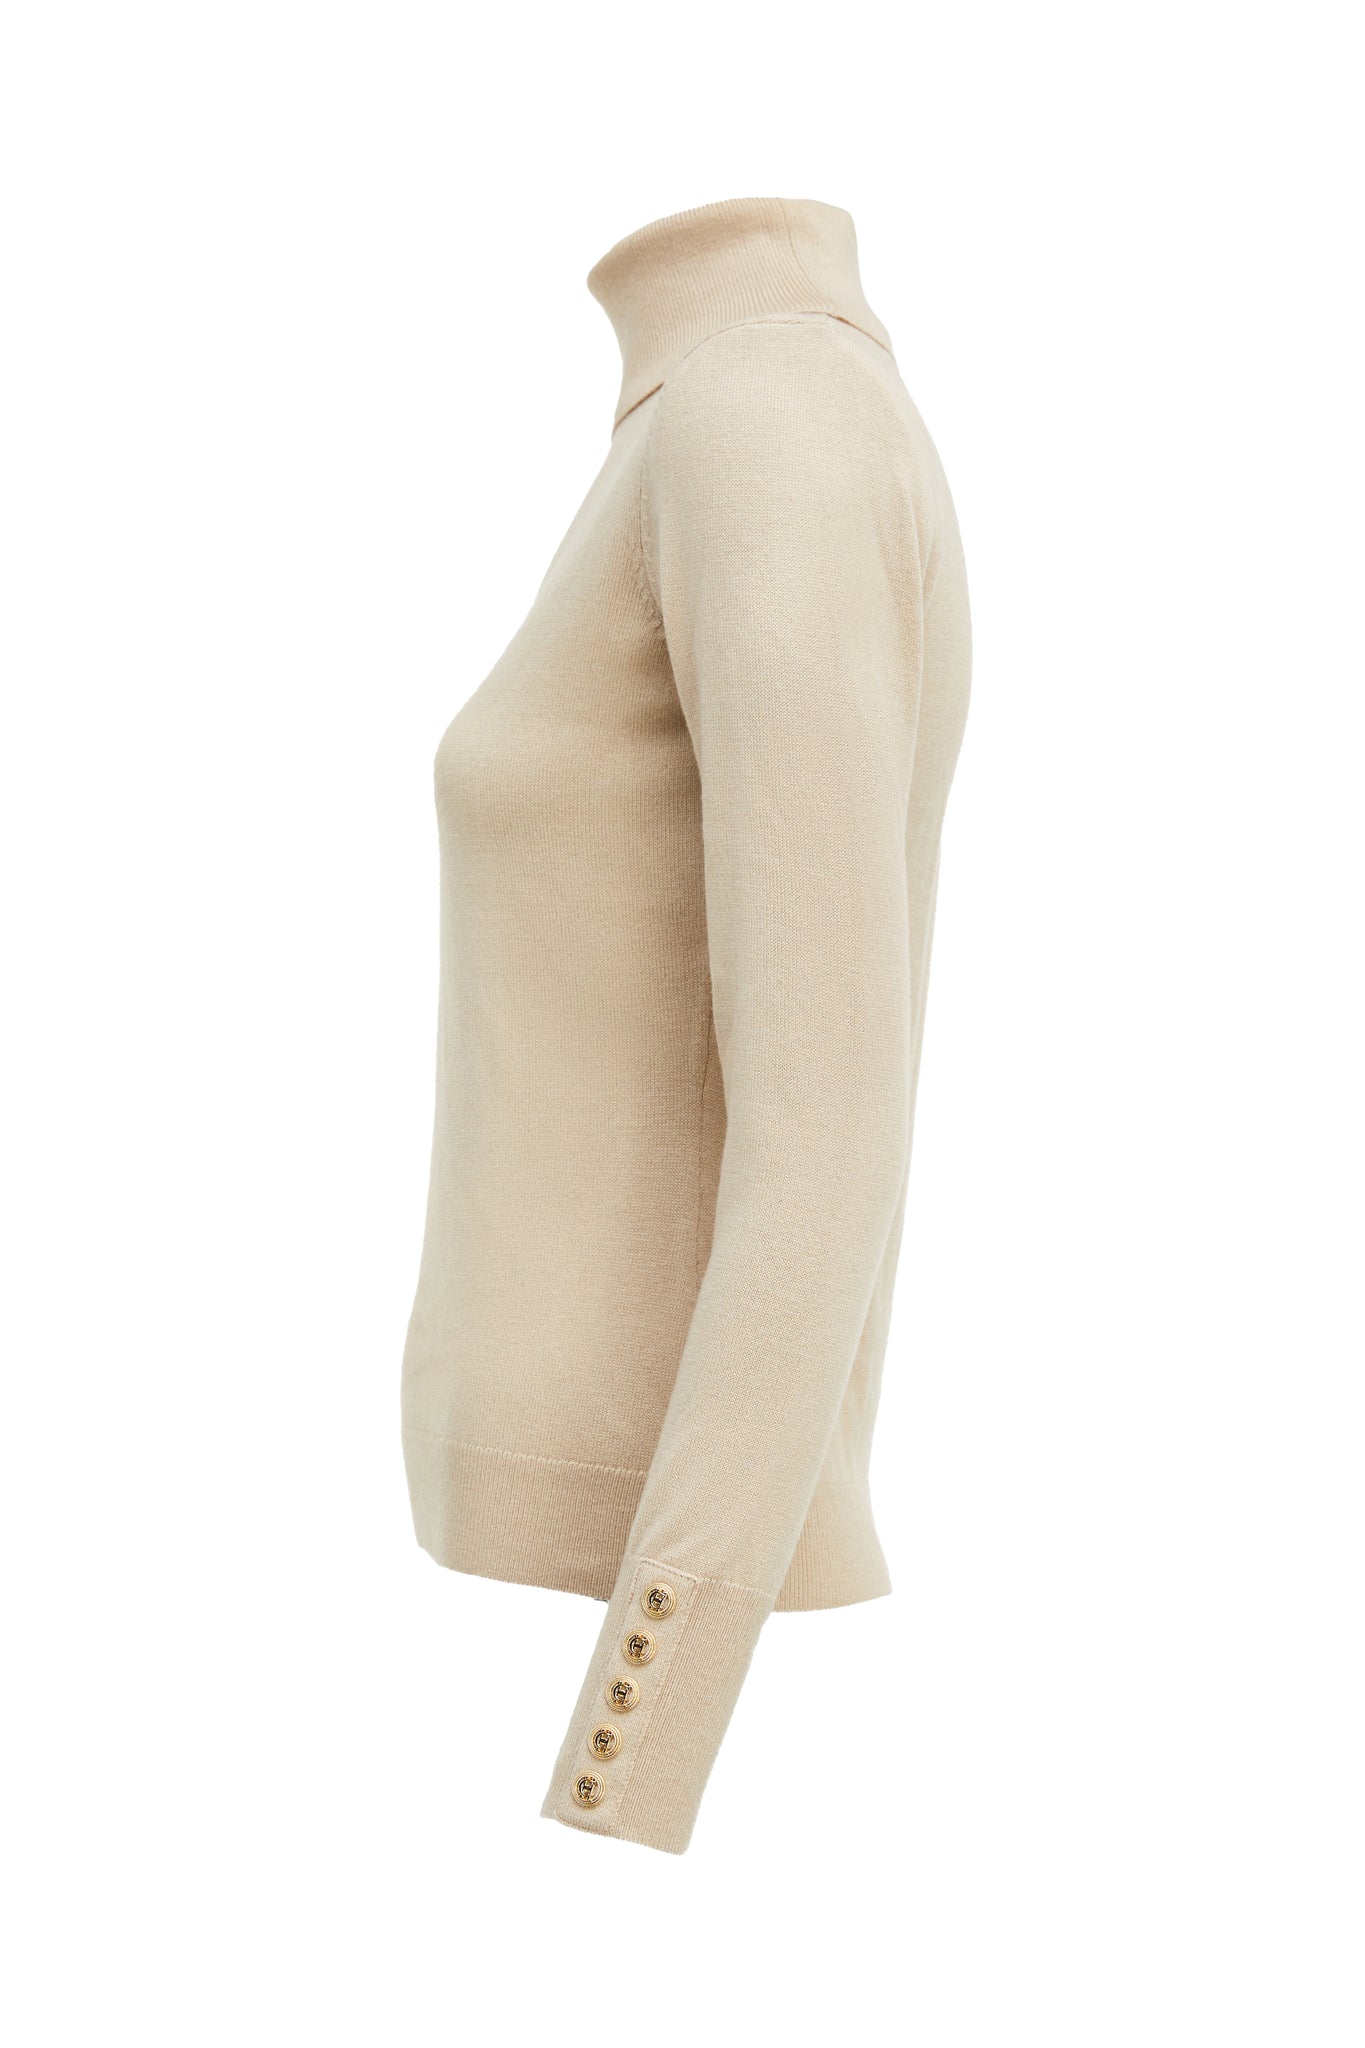 side of cashmere blend lightweight Roll neck knit in stone with shoulder pads 